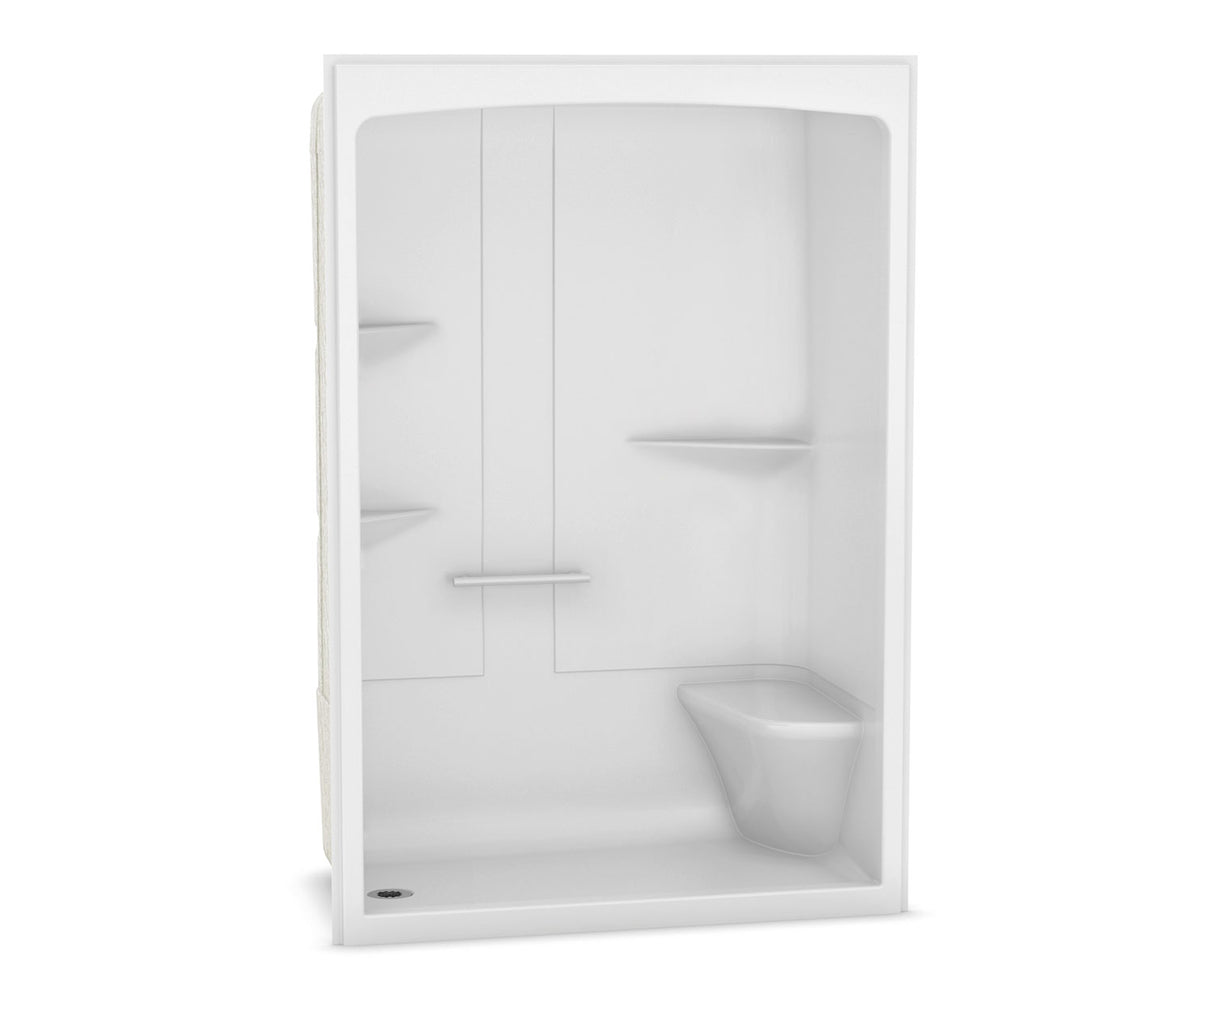 MAAX 105922-RC-000-001 Camelia SHR-6034 Acrylic Alcove Center Drain One-Piece Shower in White